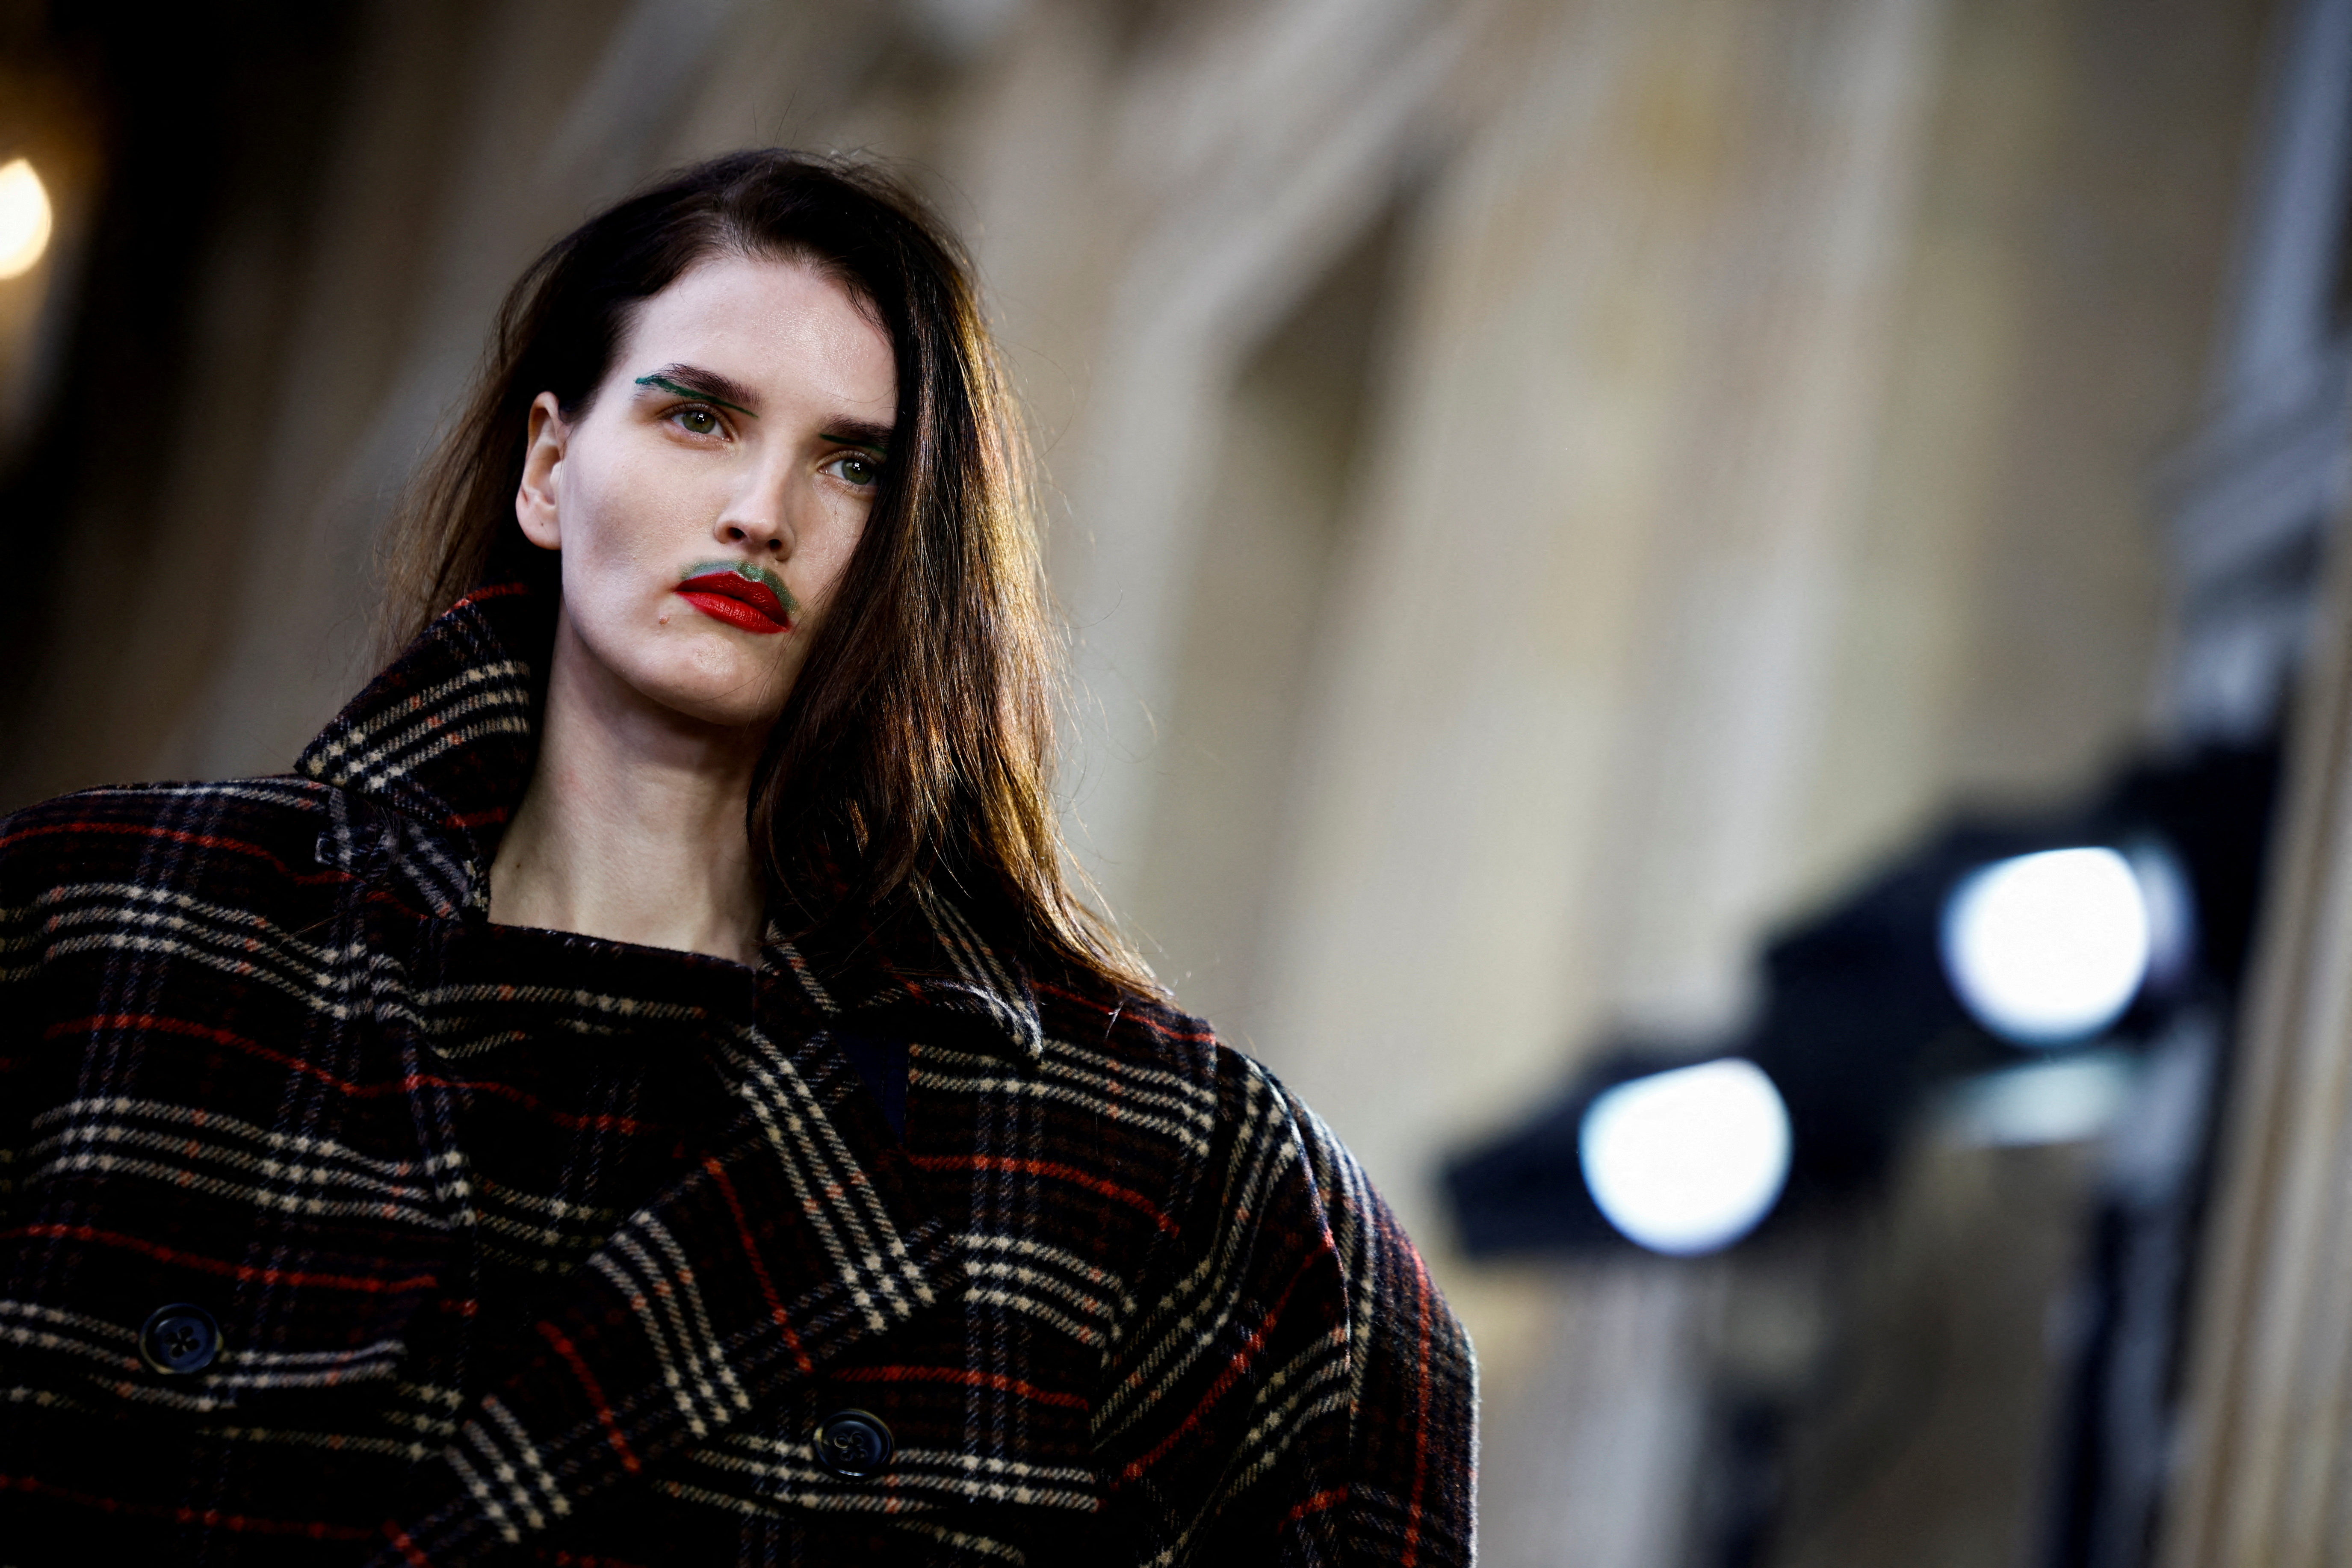 Kronthaler comes out of the shadows for Vivienne Westwood in Paris